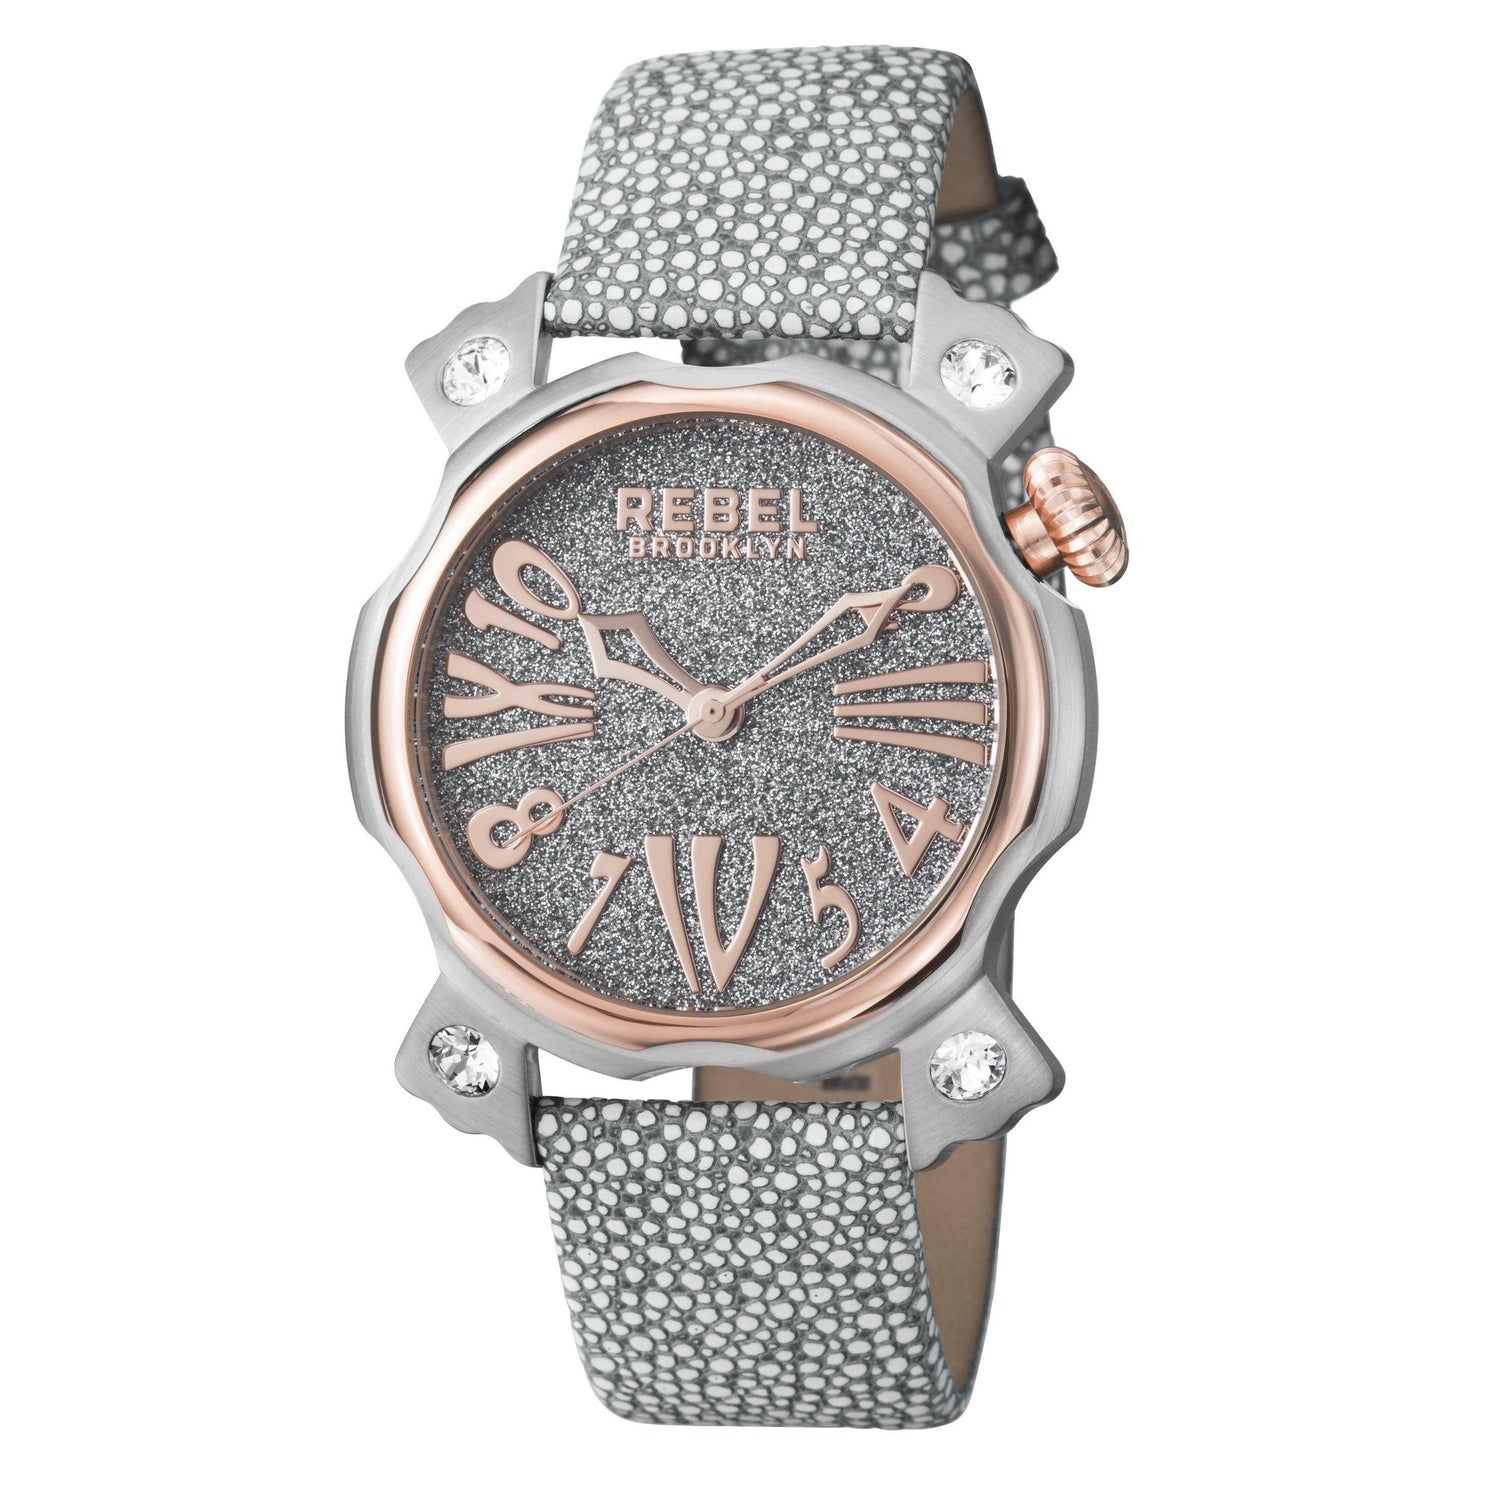 Coney Island Silver Dial Women's Watch-Rebel Brooklyn Watches - RB104-5011 - 